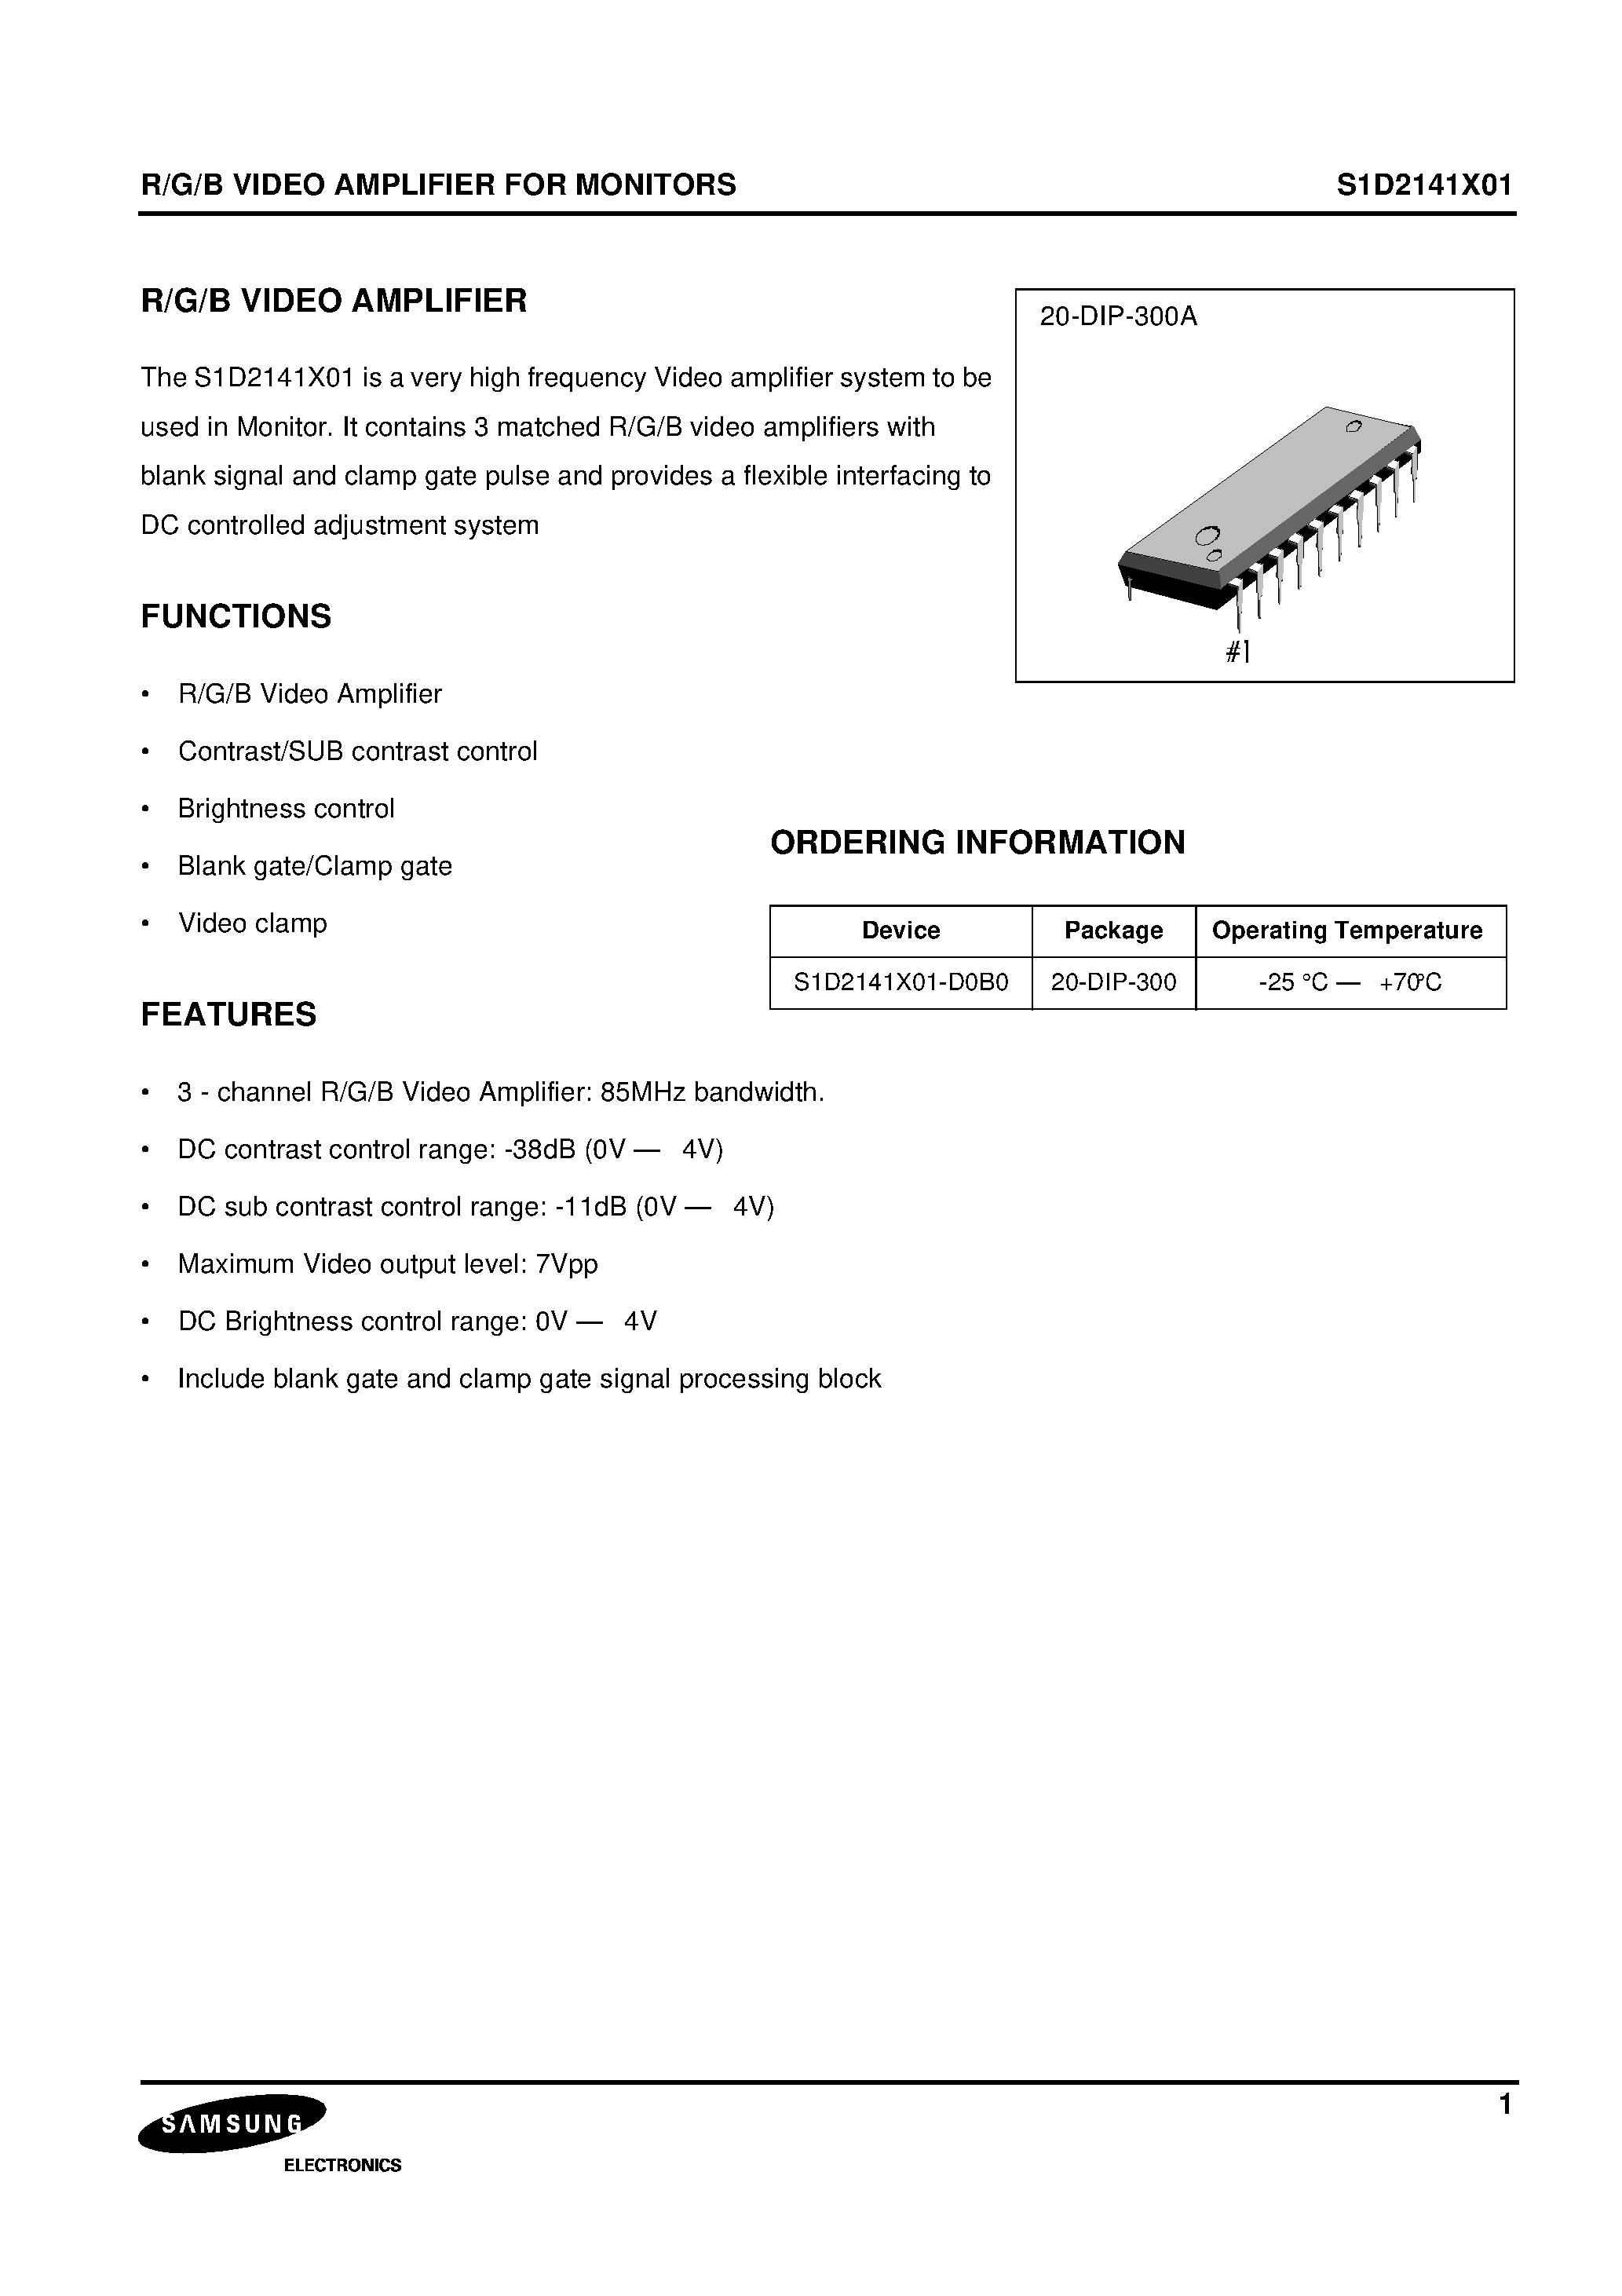 Datasheet S1D2141X01-D0B0 - R/G/B VIDEO AMPLIFIER FOR MONITORS page 1